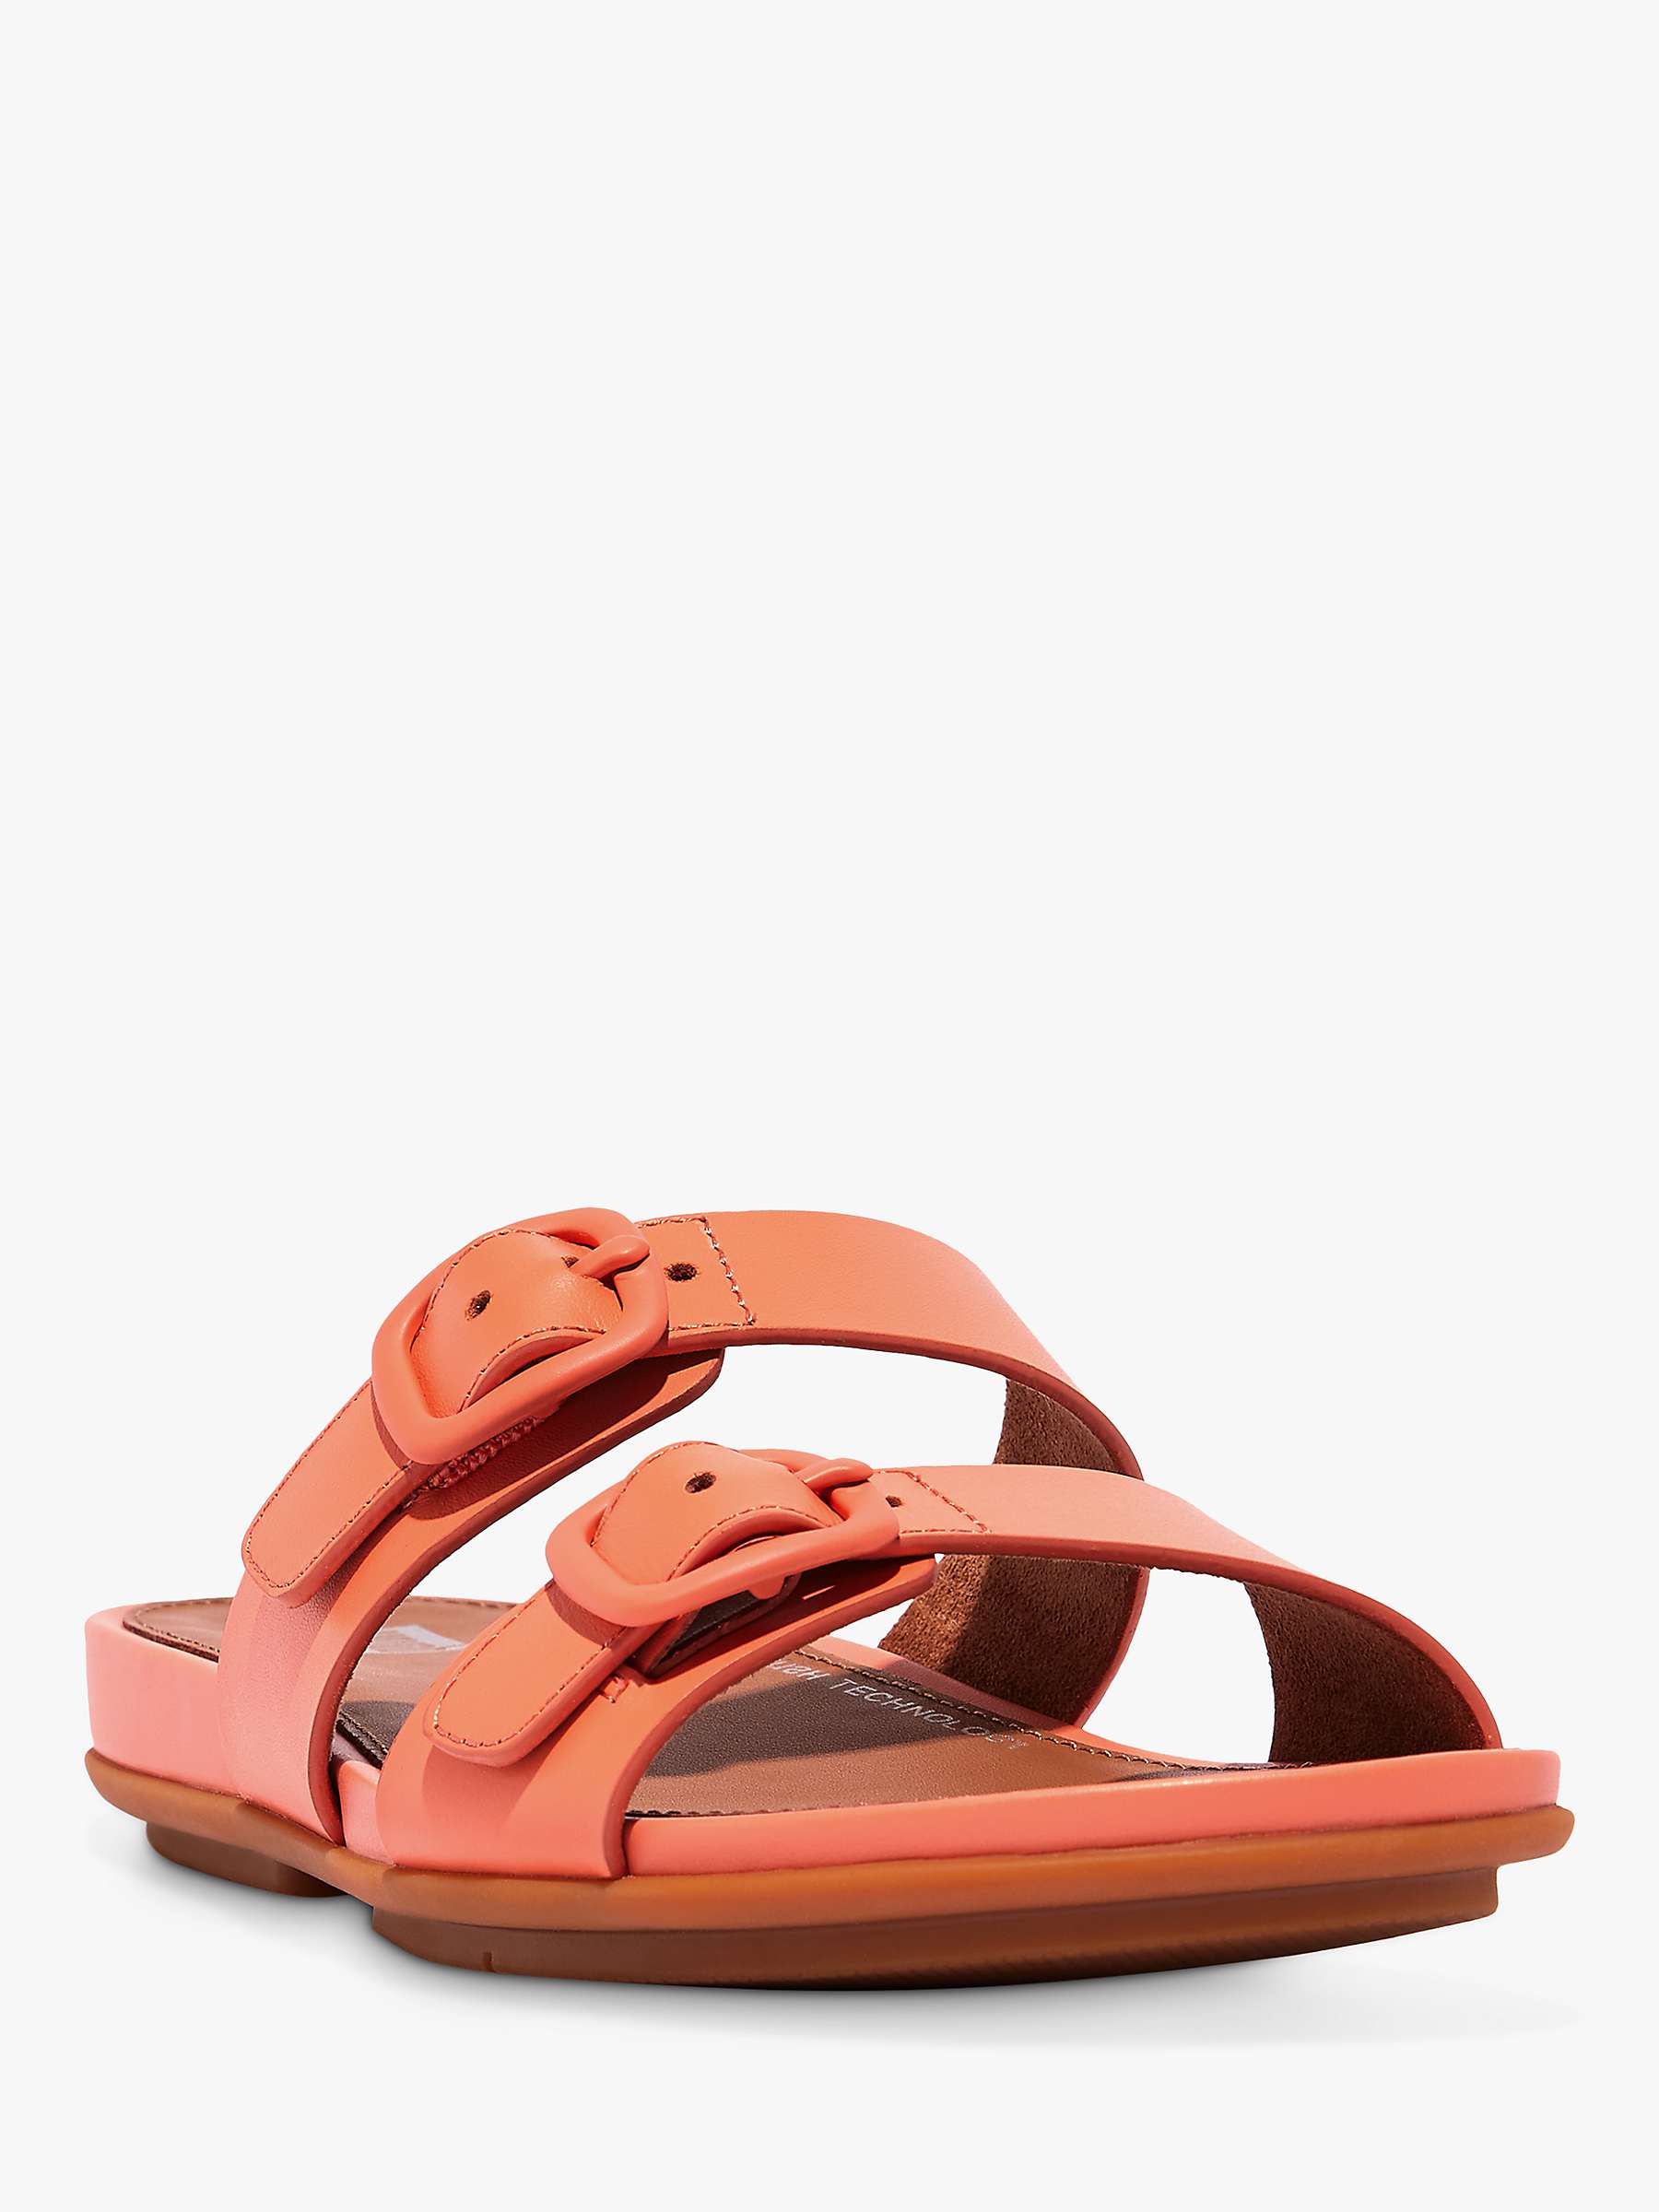 Buy FitFlop Gracie Leather Two Strap Sandals Online at johnlewis.com